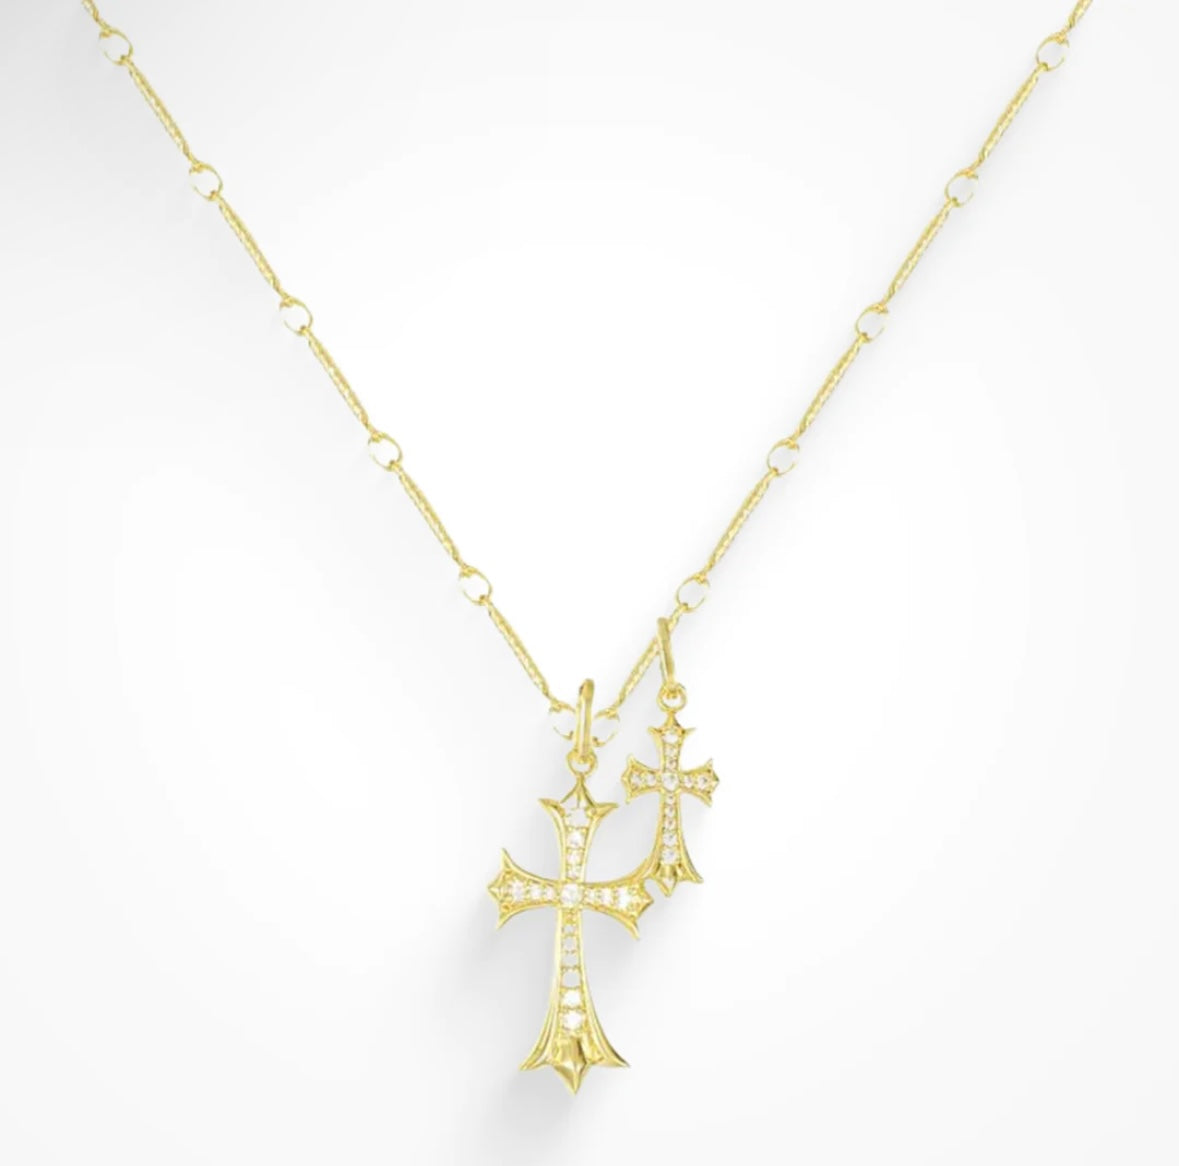 Josephine Necklace Gold - Water Resistant